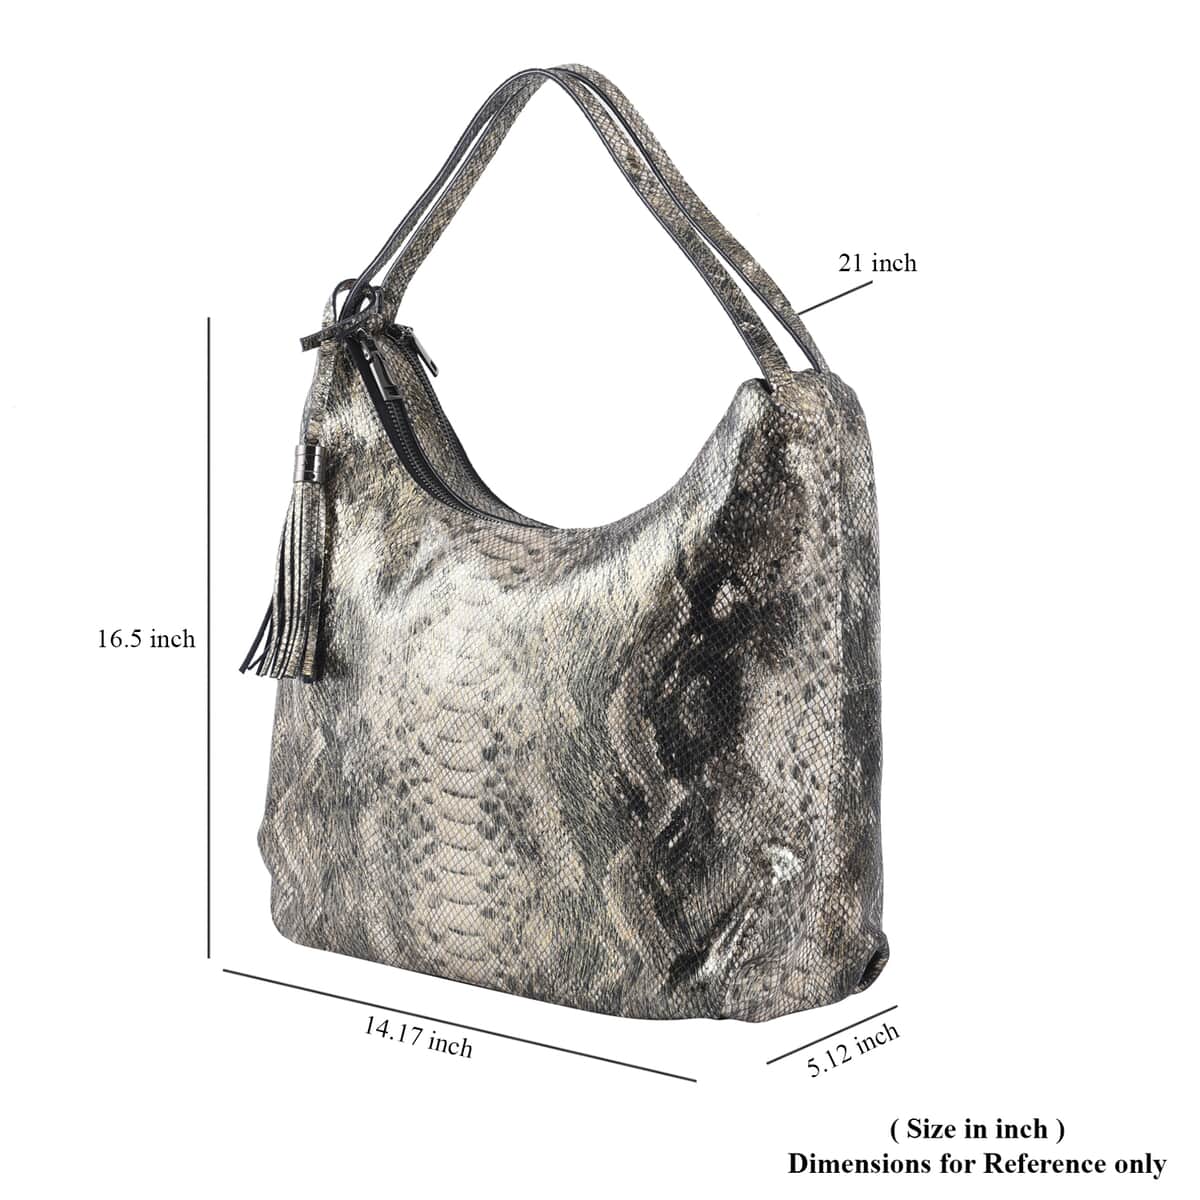 Gold and Black Snake Print Genuine Leather Hobo Bag (16.5"x5.12"x14.17") with 47" Detachable Shoulder Strap and 6" Handle Drop image number 6